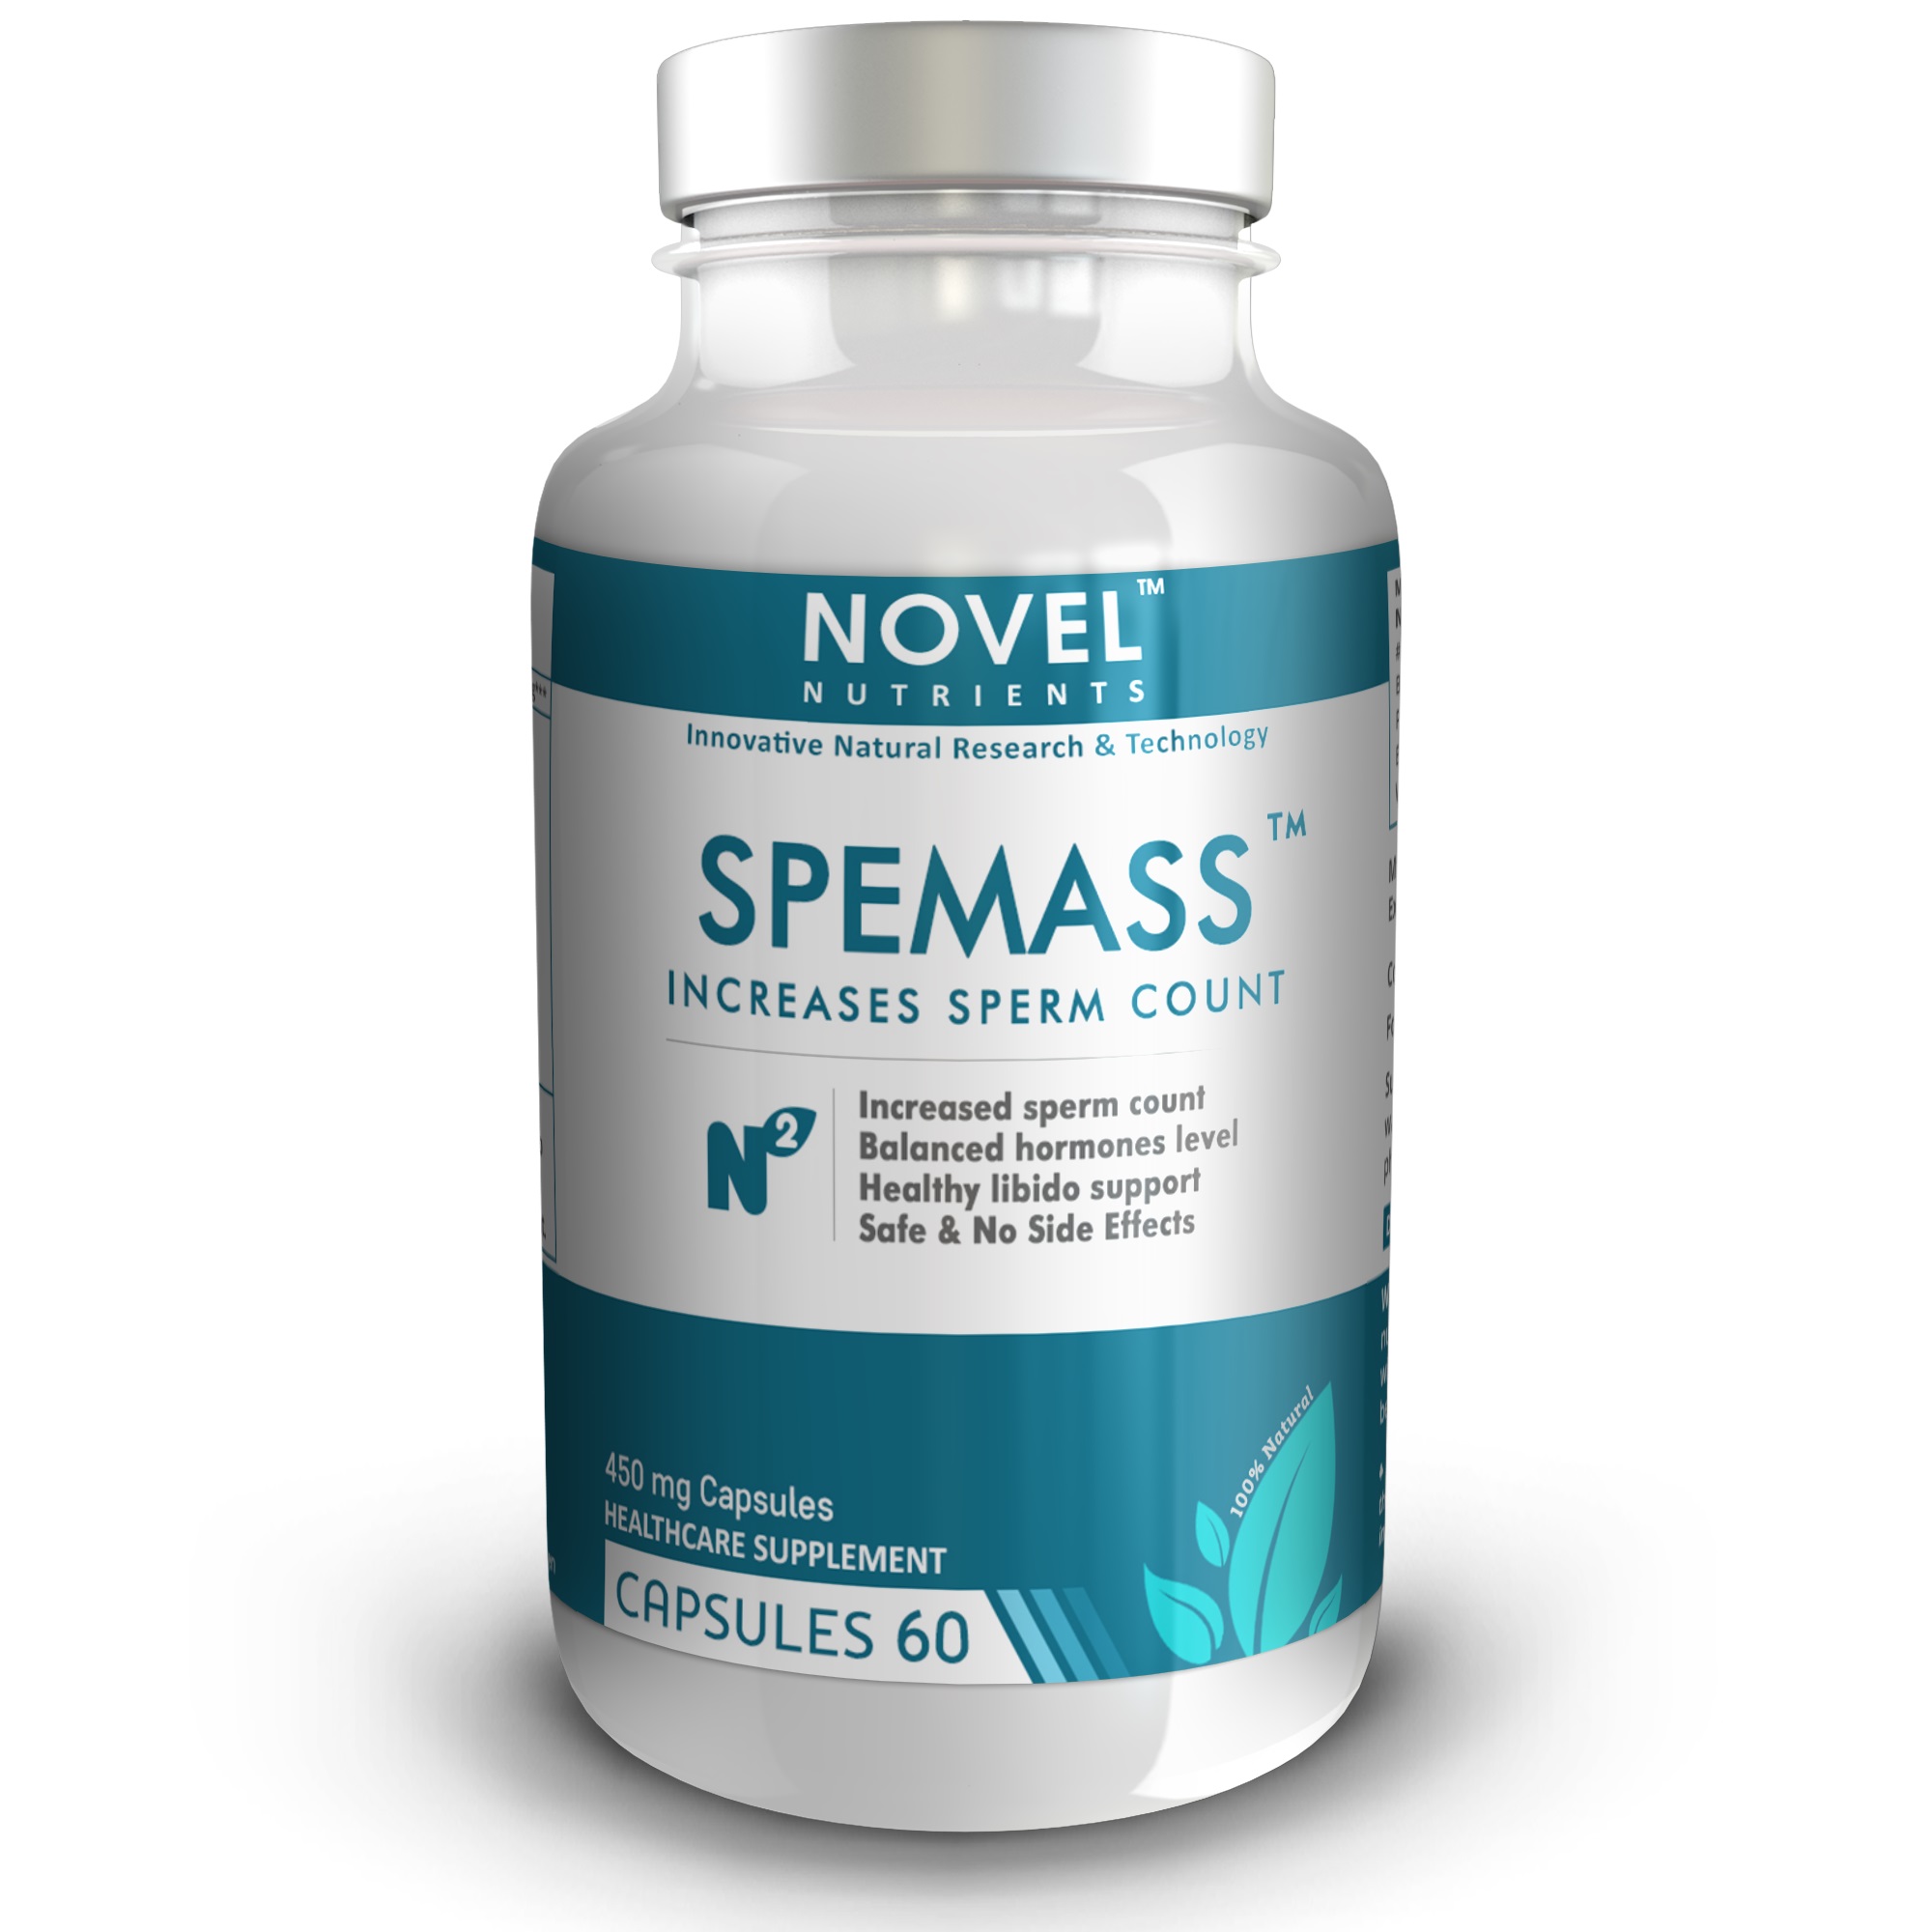 Spemass - 450 mg 60 Capsules Increases Sperm Count